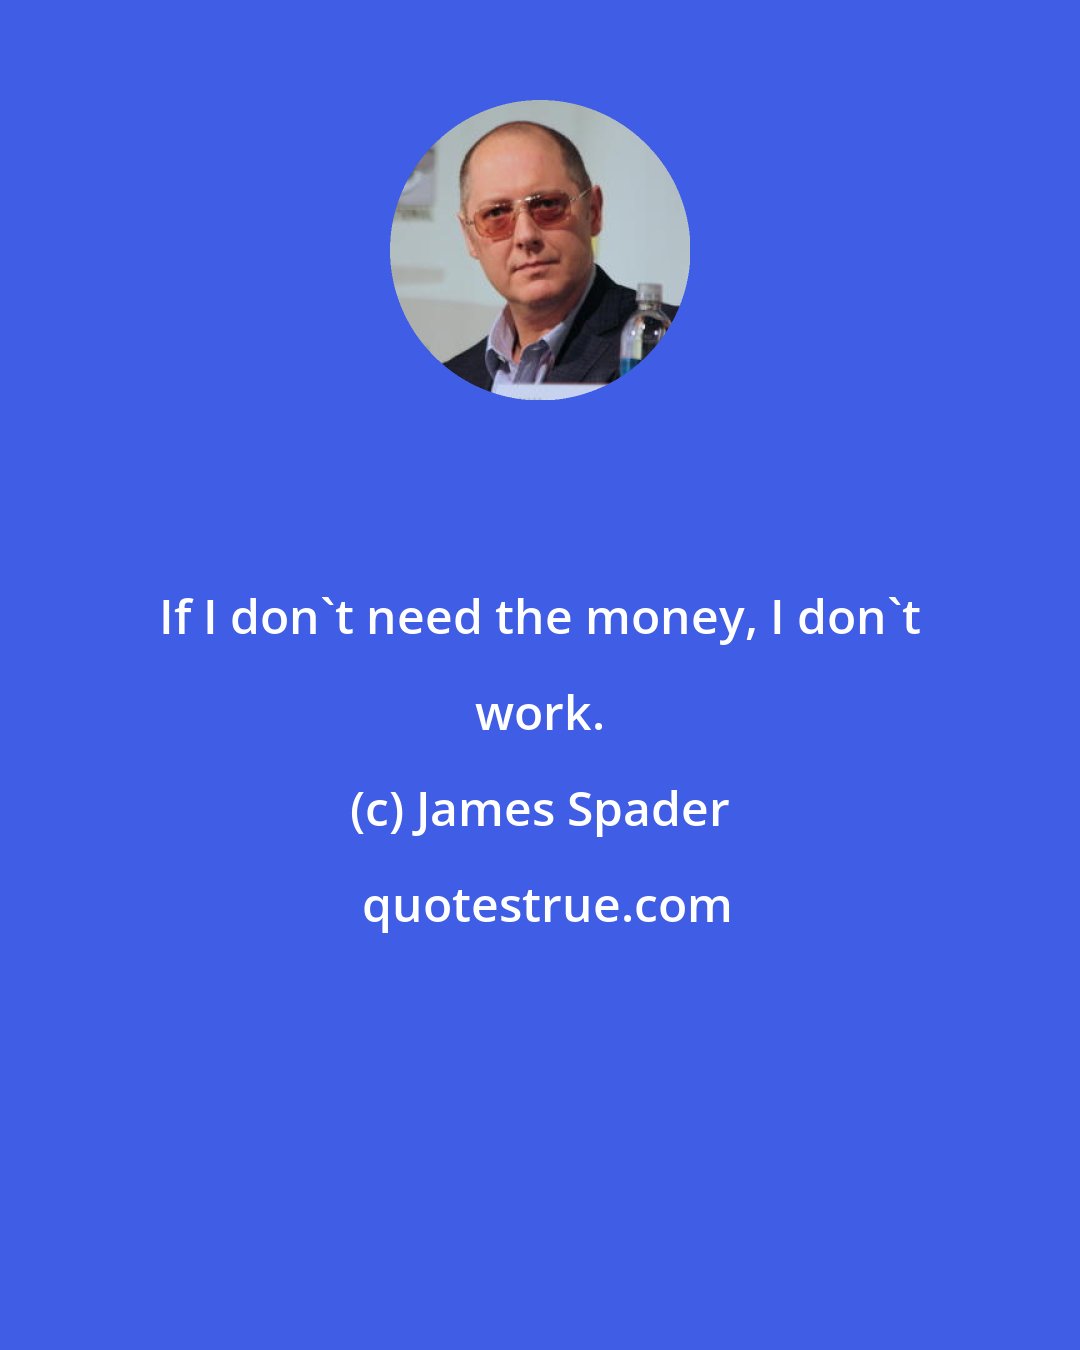 James Spader: If I don't need the money, I don't work.